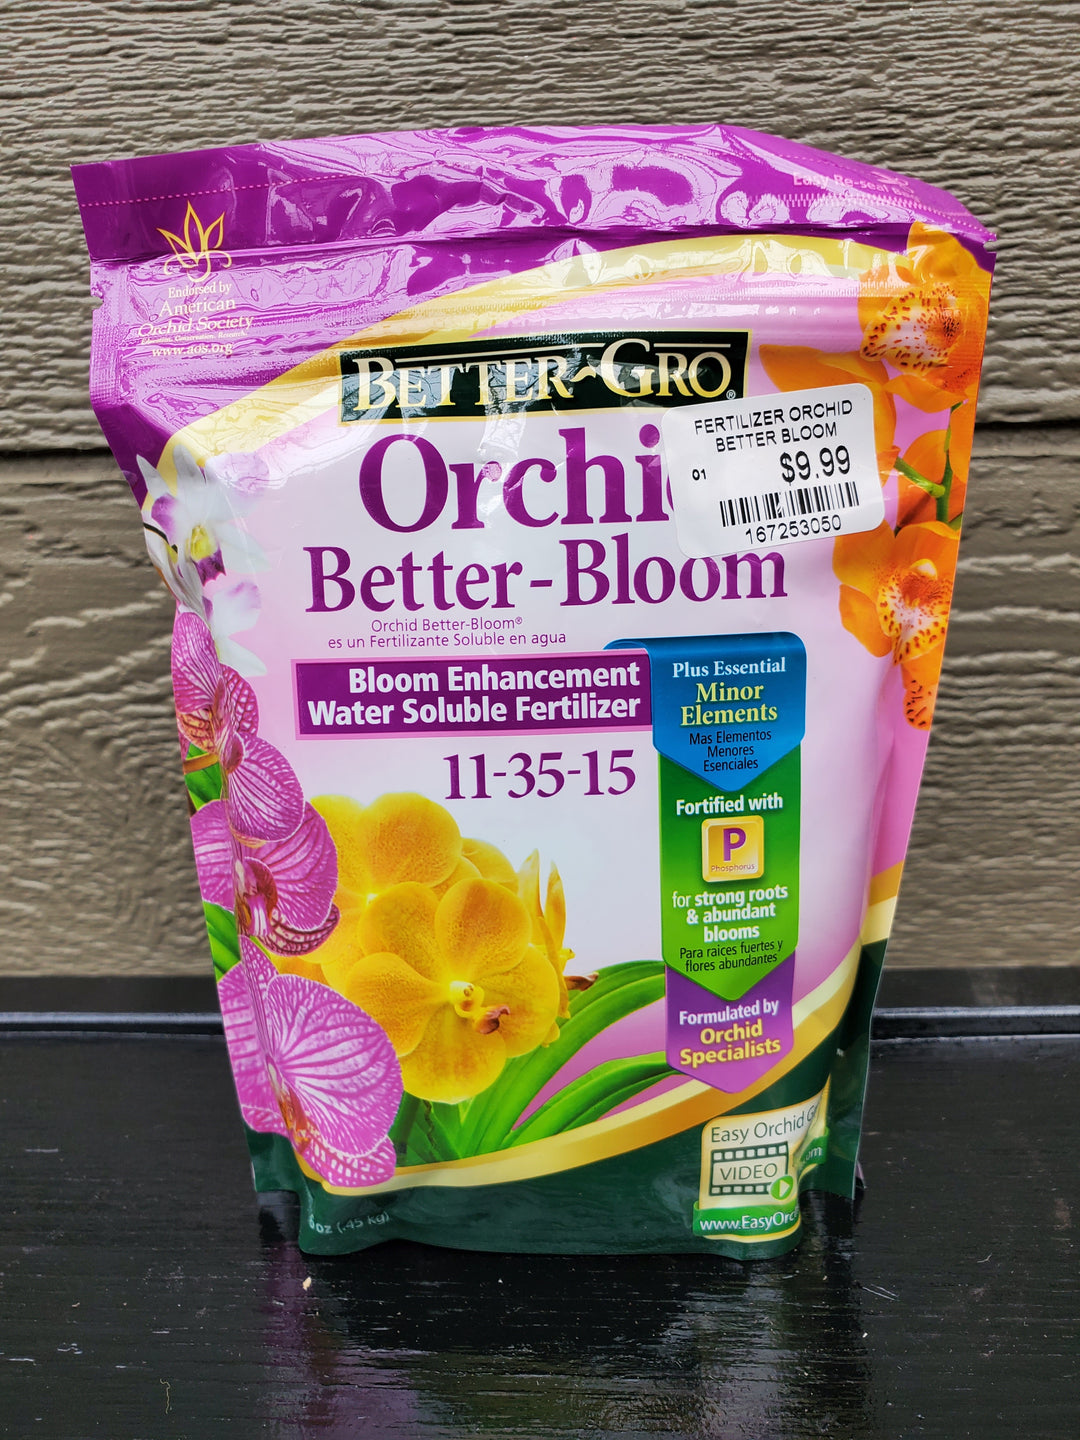 Orchid Better-Bloom 11-35-15